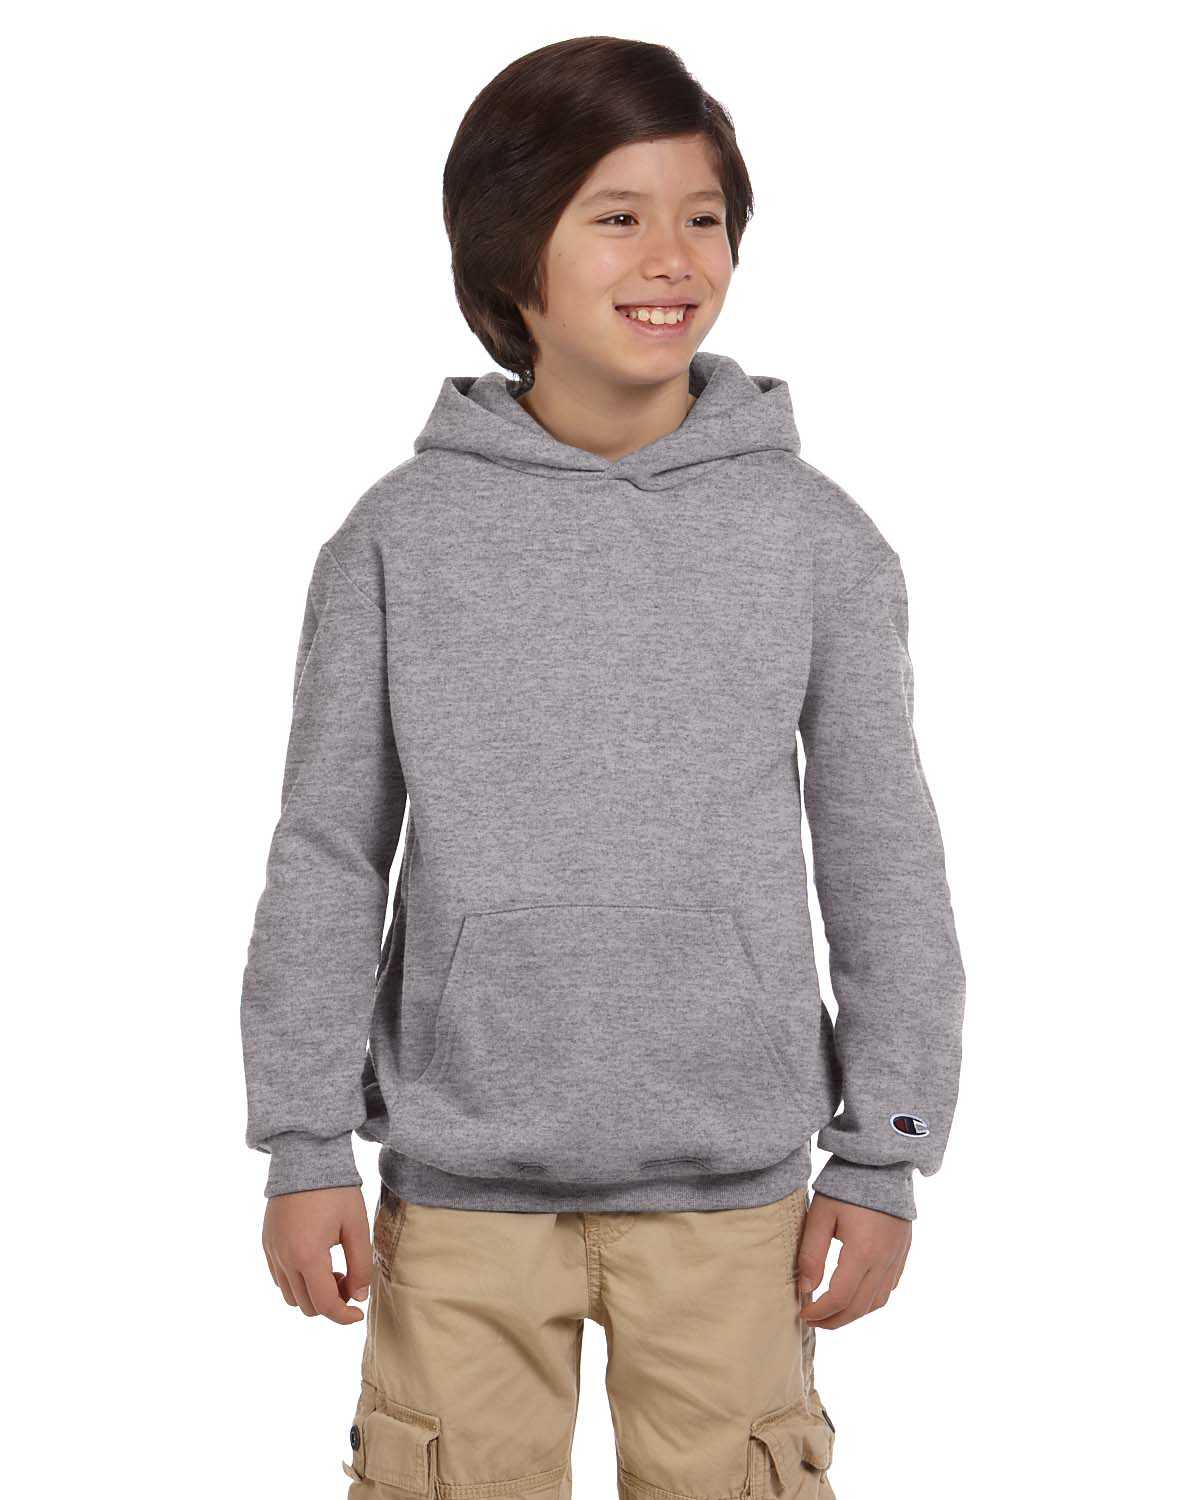 Champion S790 Youth 9 oz. Double Dry Eco Pullover Hood | ApparelChoice.com